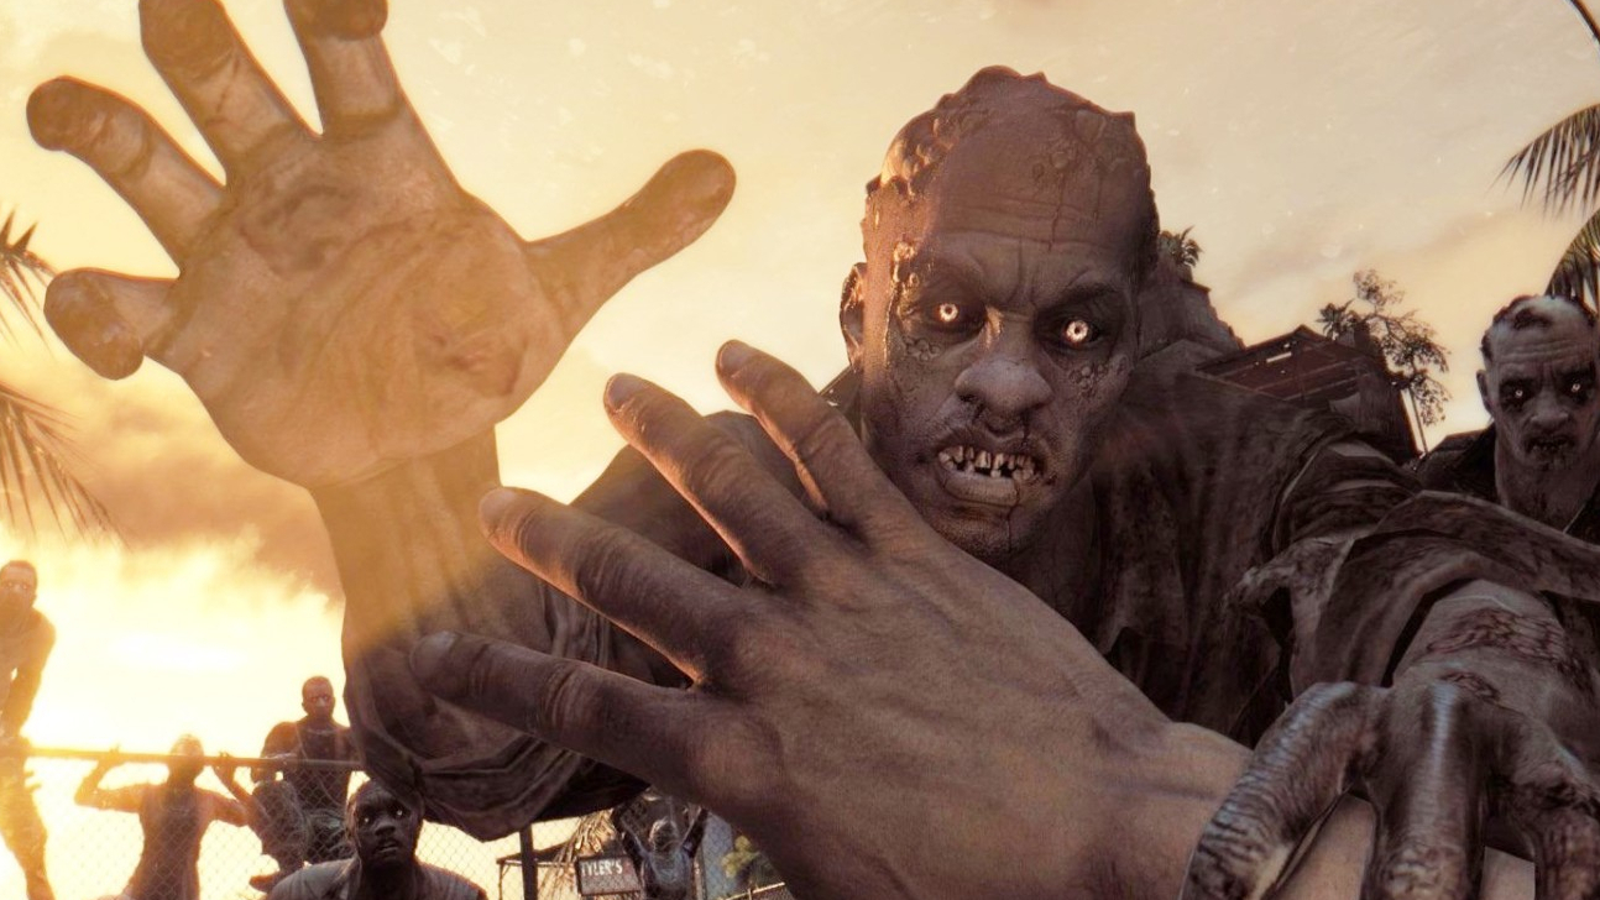 Dying Light' receives free PS5 upgrade with Xbox Series X